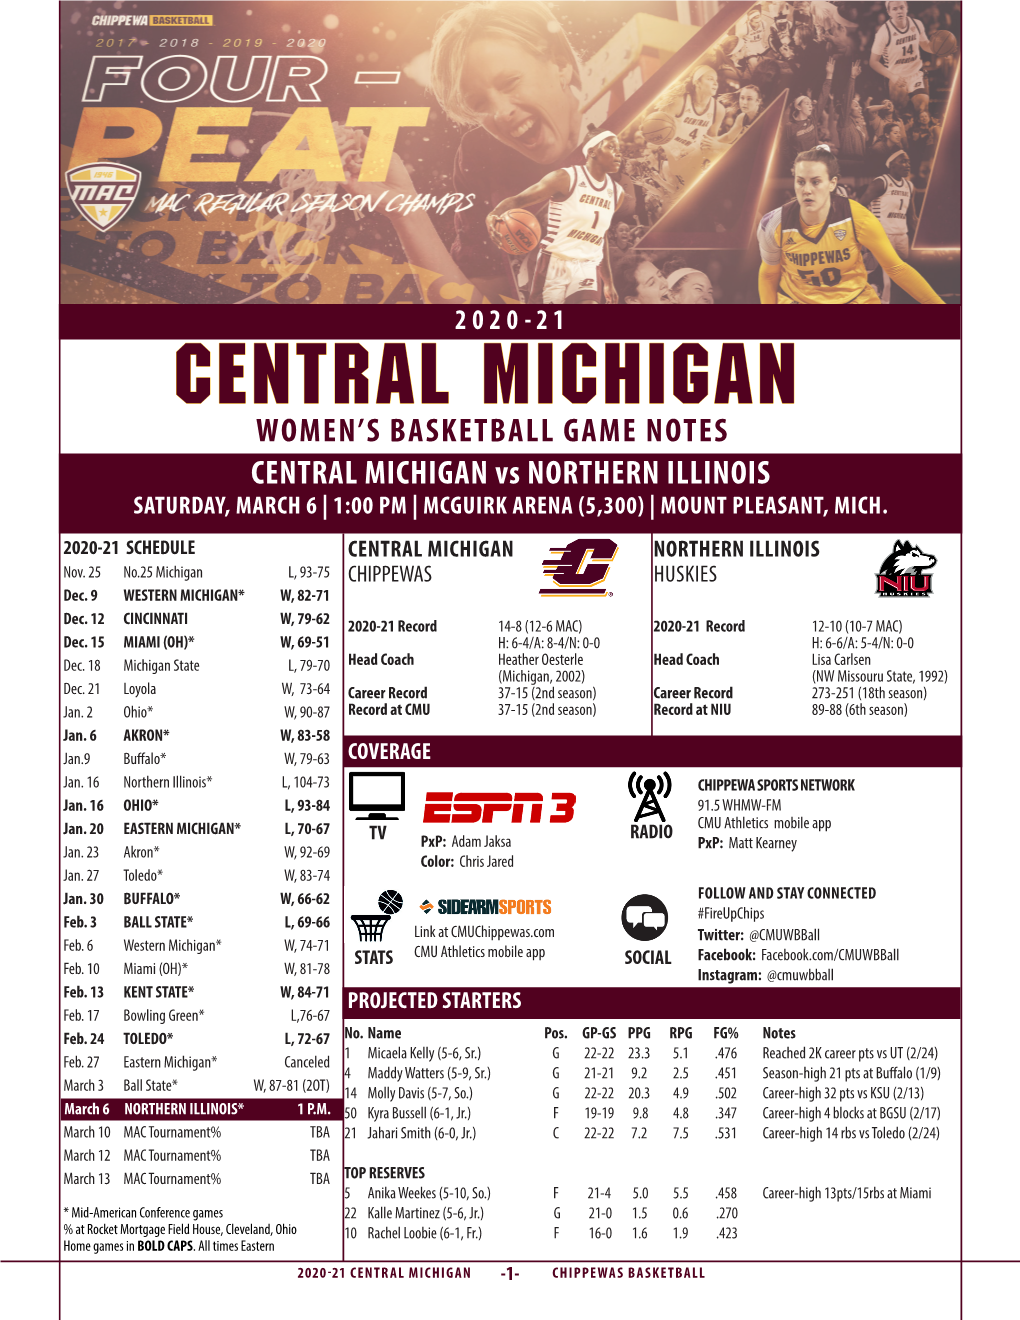 CENTRAL MICHIGAN WOMEN’S BASKETBALL GAME NOTES CENTRAL MICHIGAN Vs NORTHERN ILLINOIS SATURDAY, MARCH 6 | 1:00 PM | MCGUIRK ARENA (5,300) | MOUNT PLEASANT, MICH